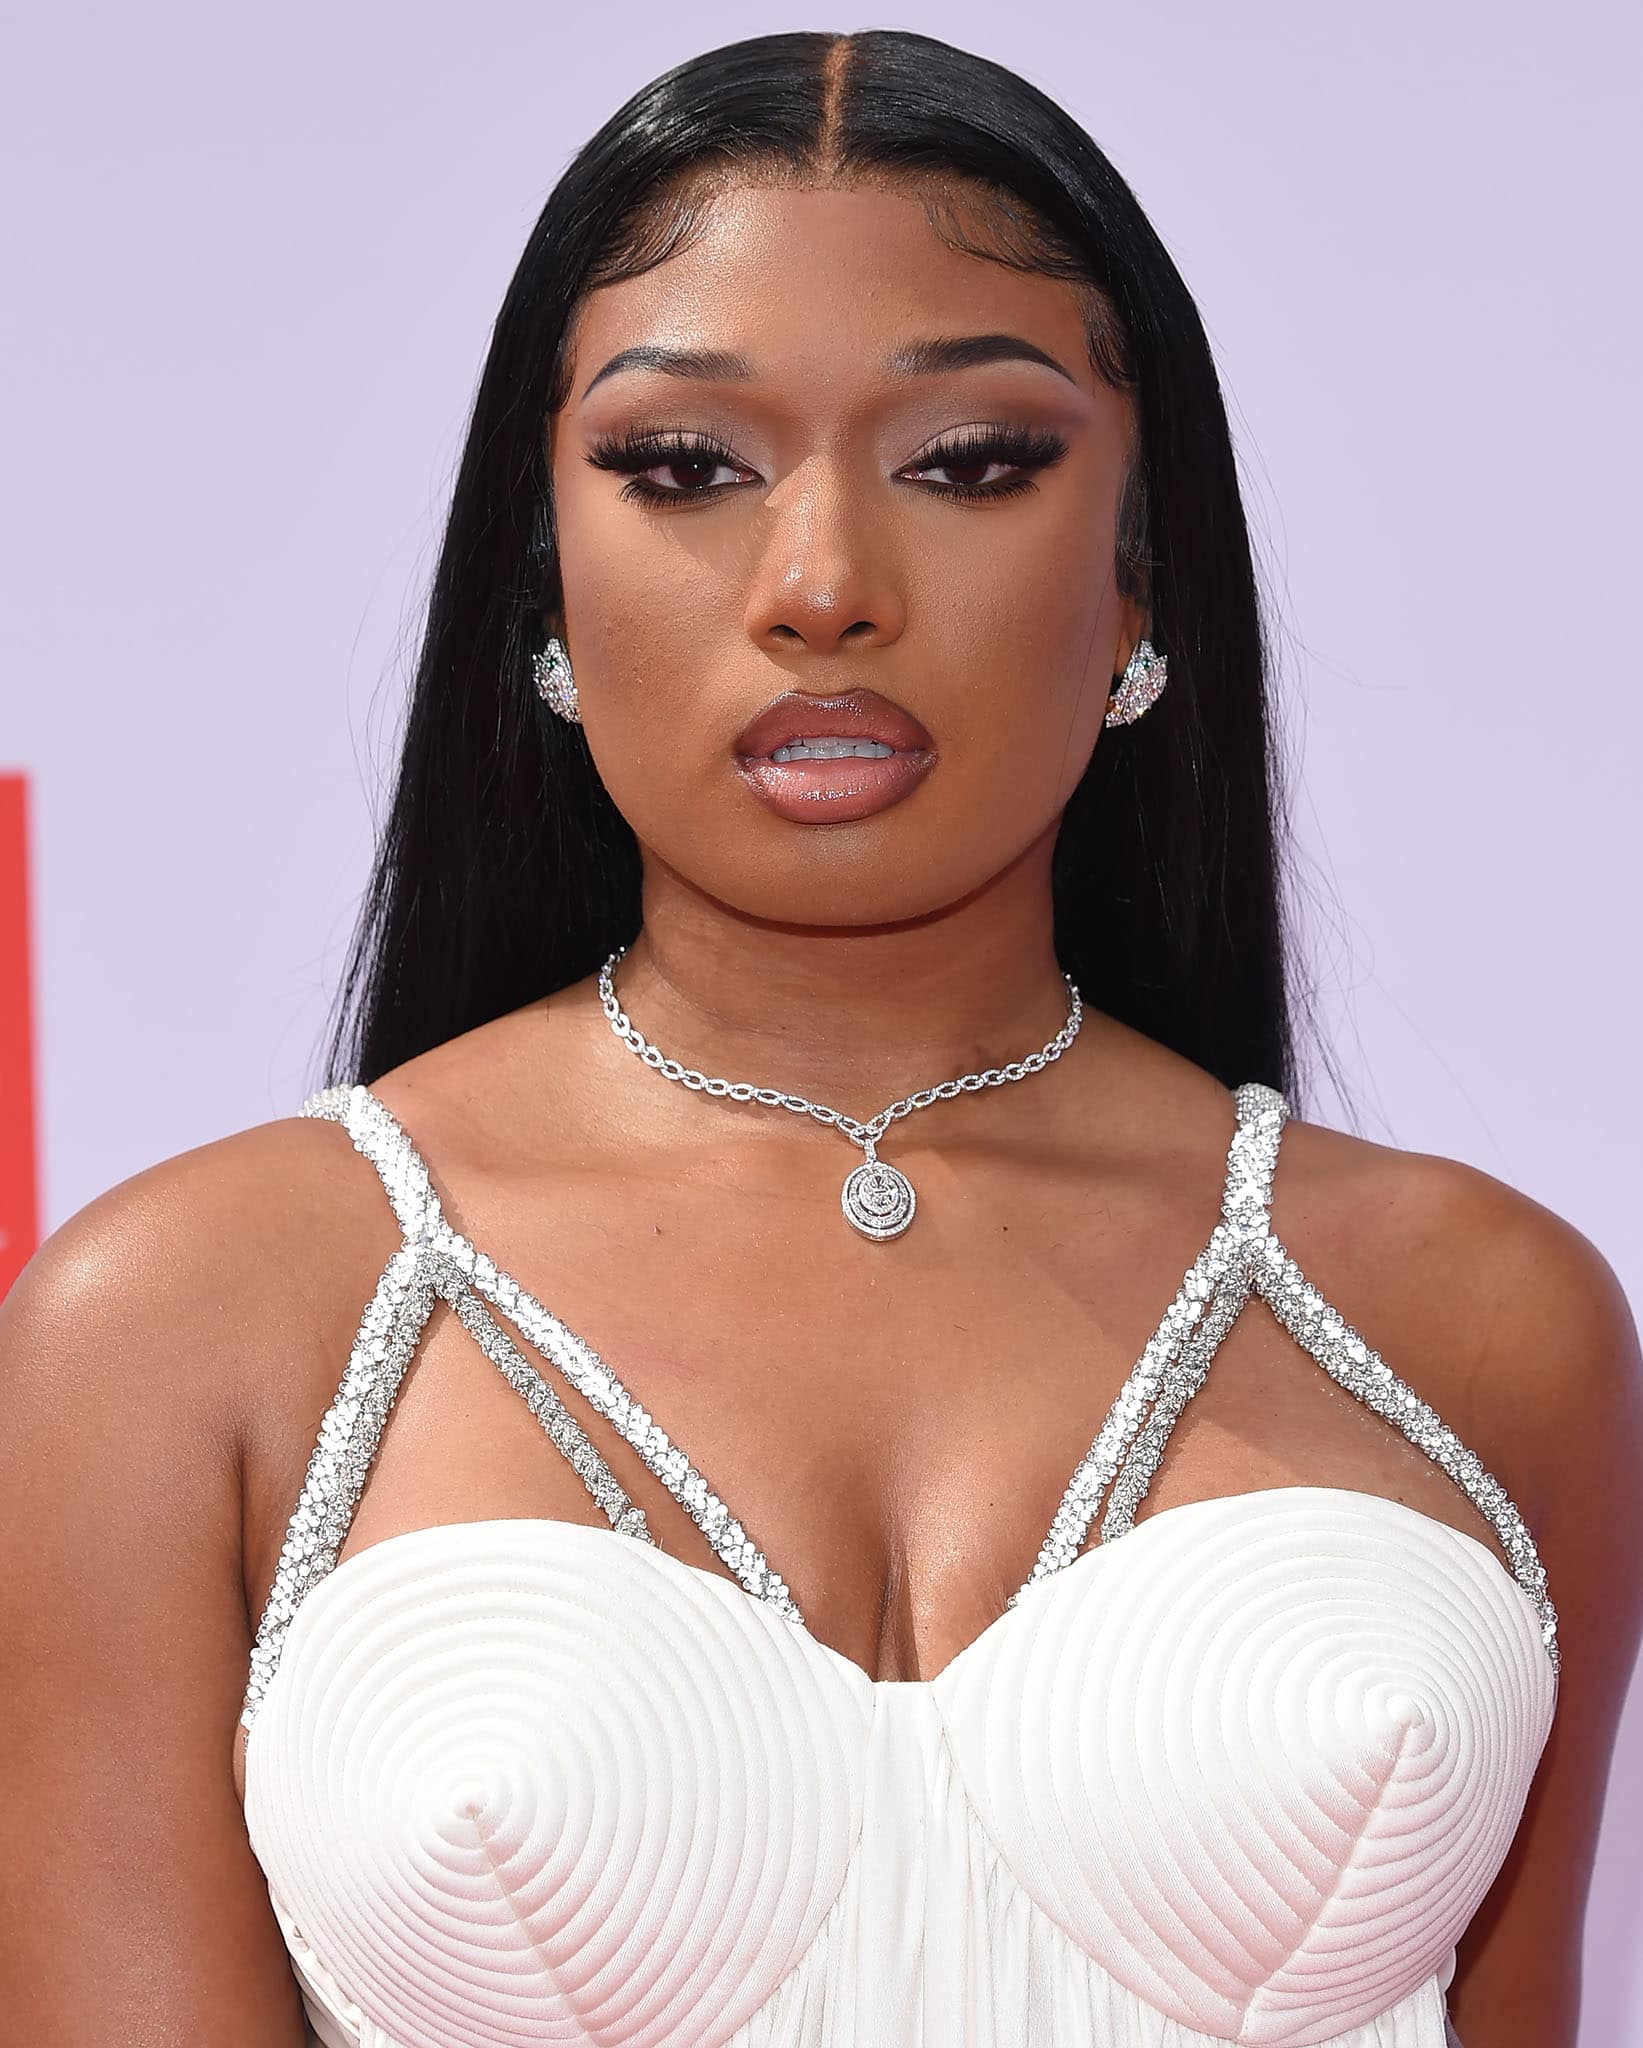 Megan Thee Stallion was exposed to music from a very early age as her mother, Holly Thomas, was a rapper who went by the rap name Holly-Wood